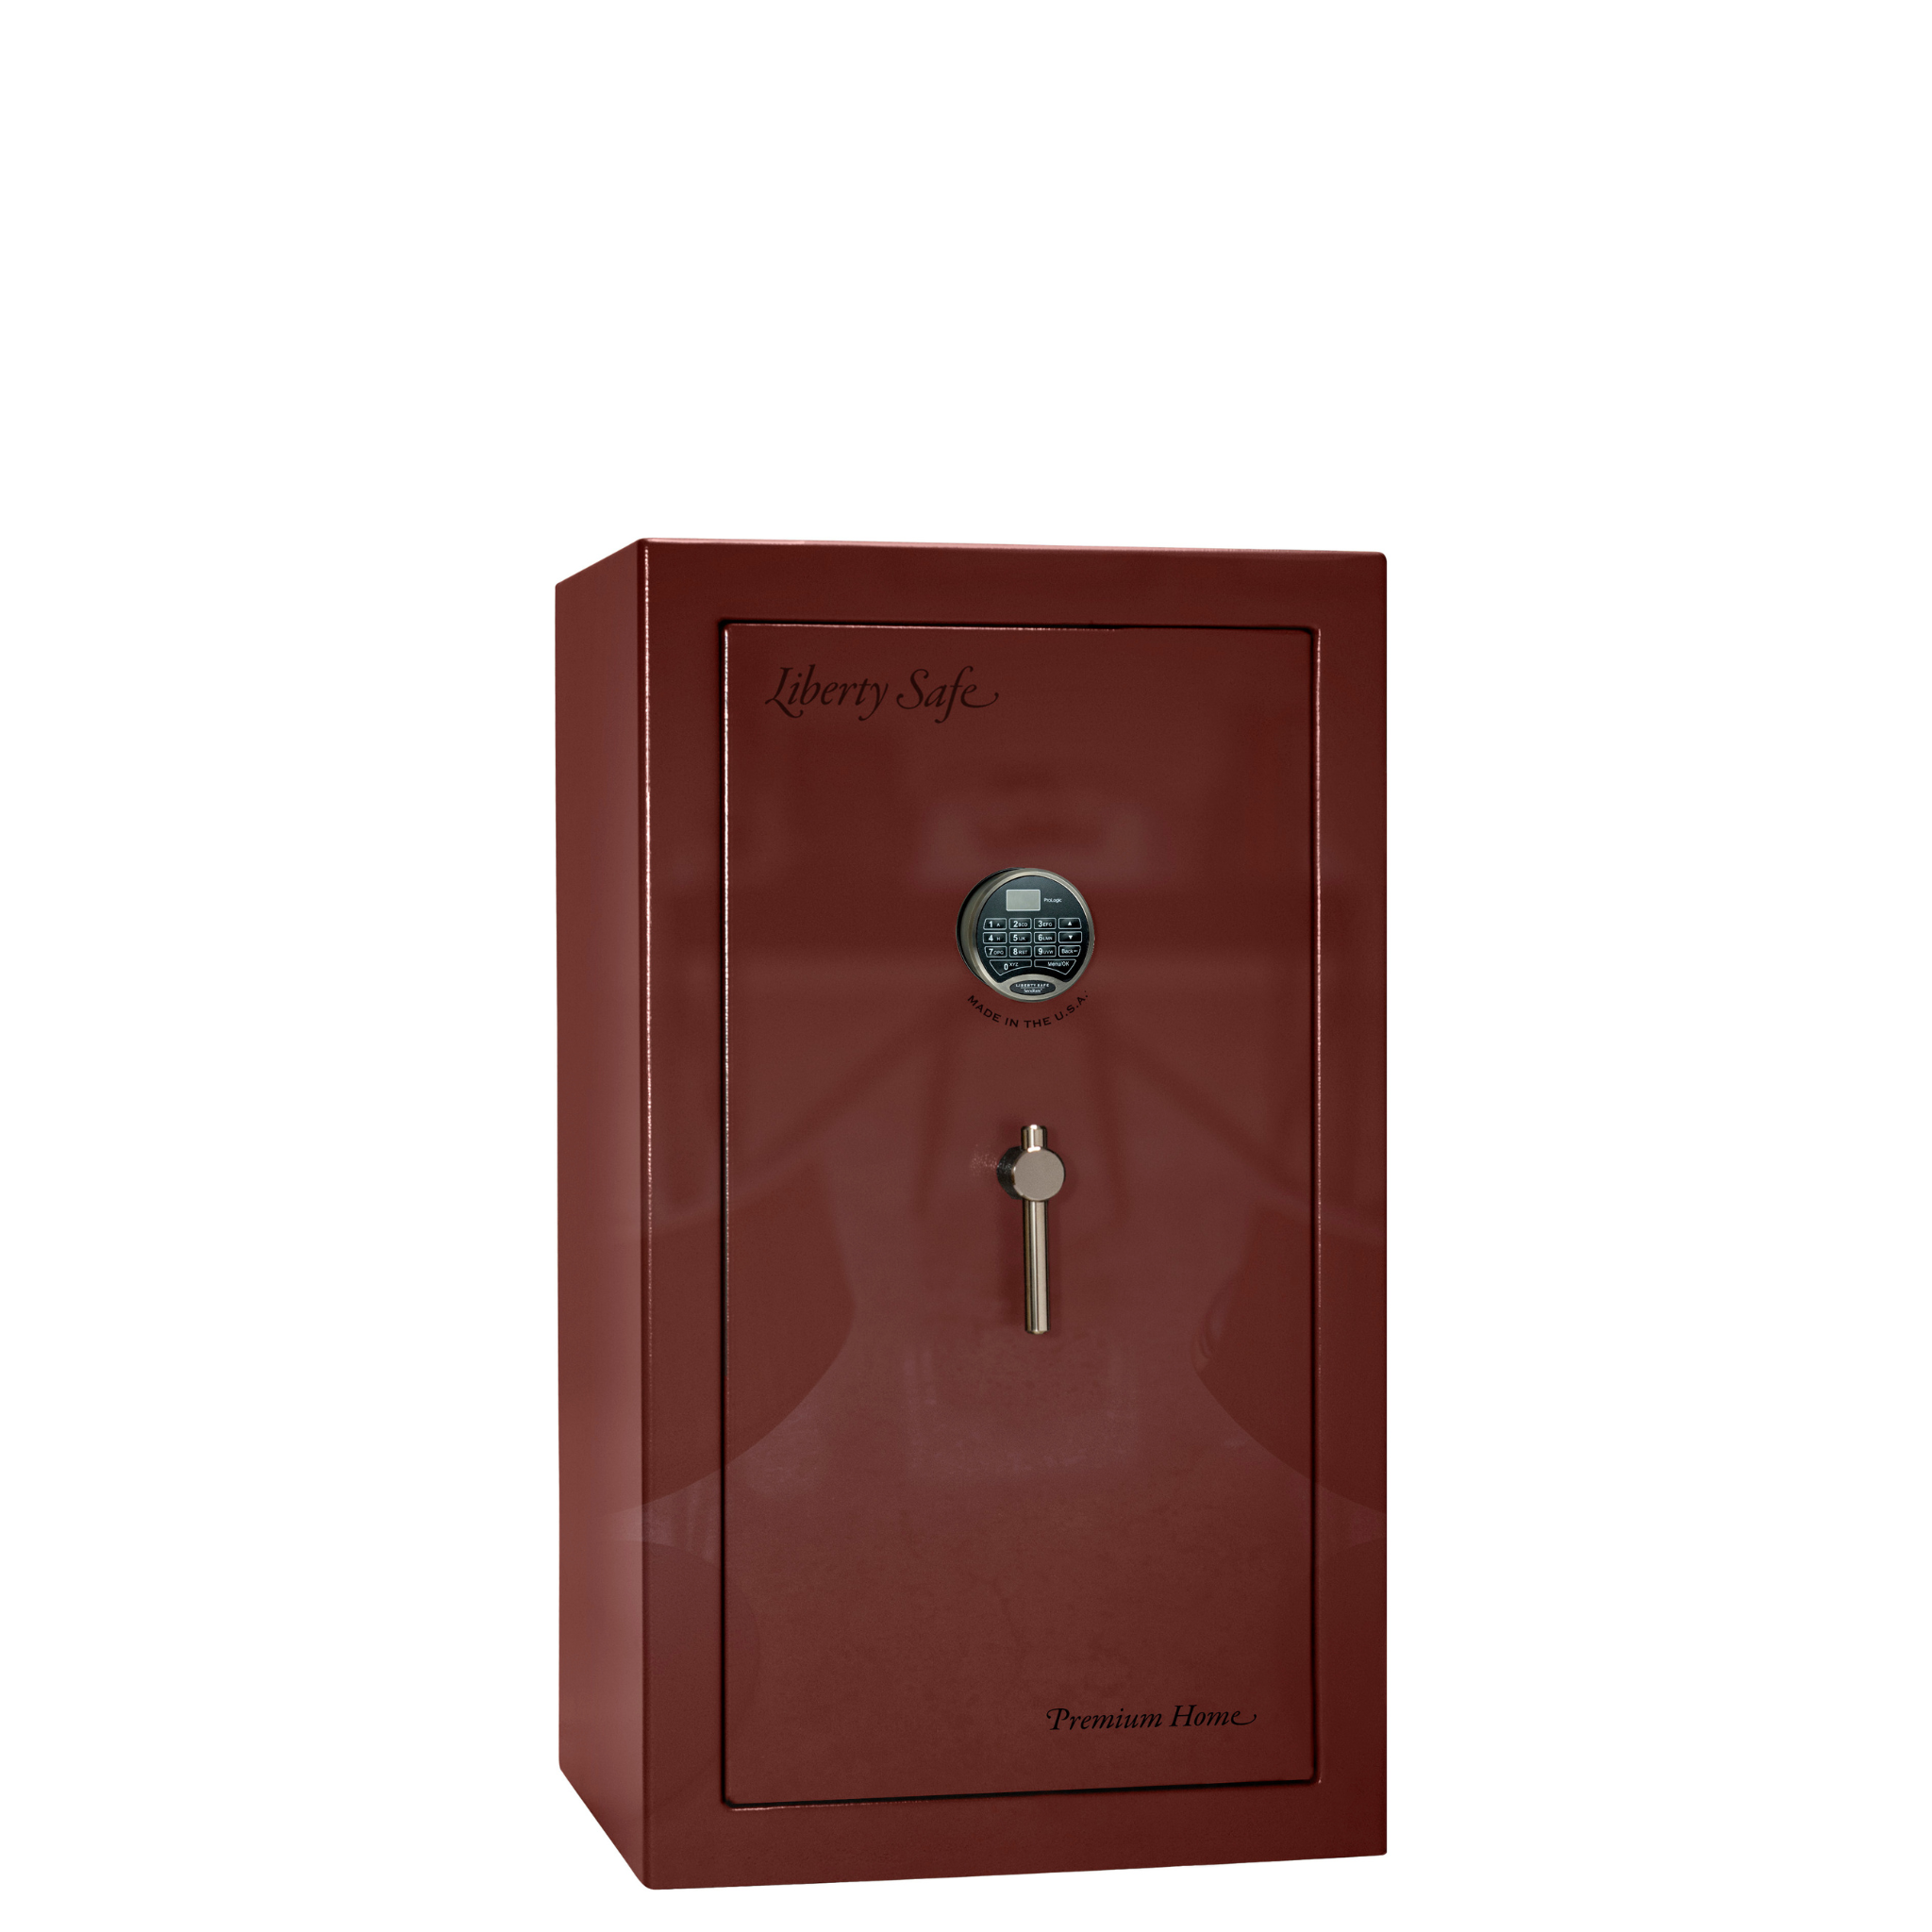 Premium Home Series | Level 7 Security | 2 Hour Fire Protection | 12 | Dimensions: 41.75"(H) x 24.5"(W) x 19"(D) | Burgundy Gloss Black Chrome - Closed Door